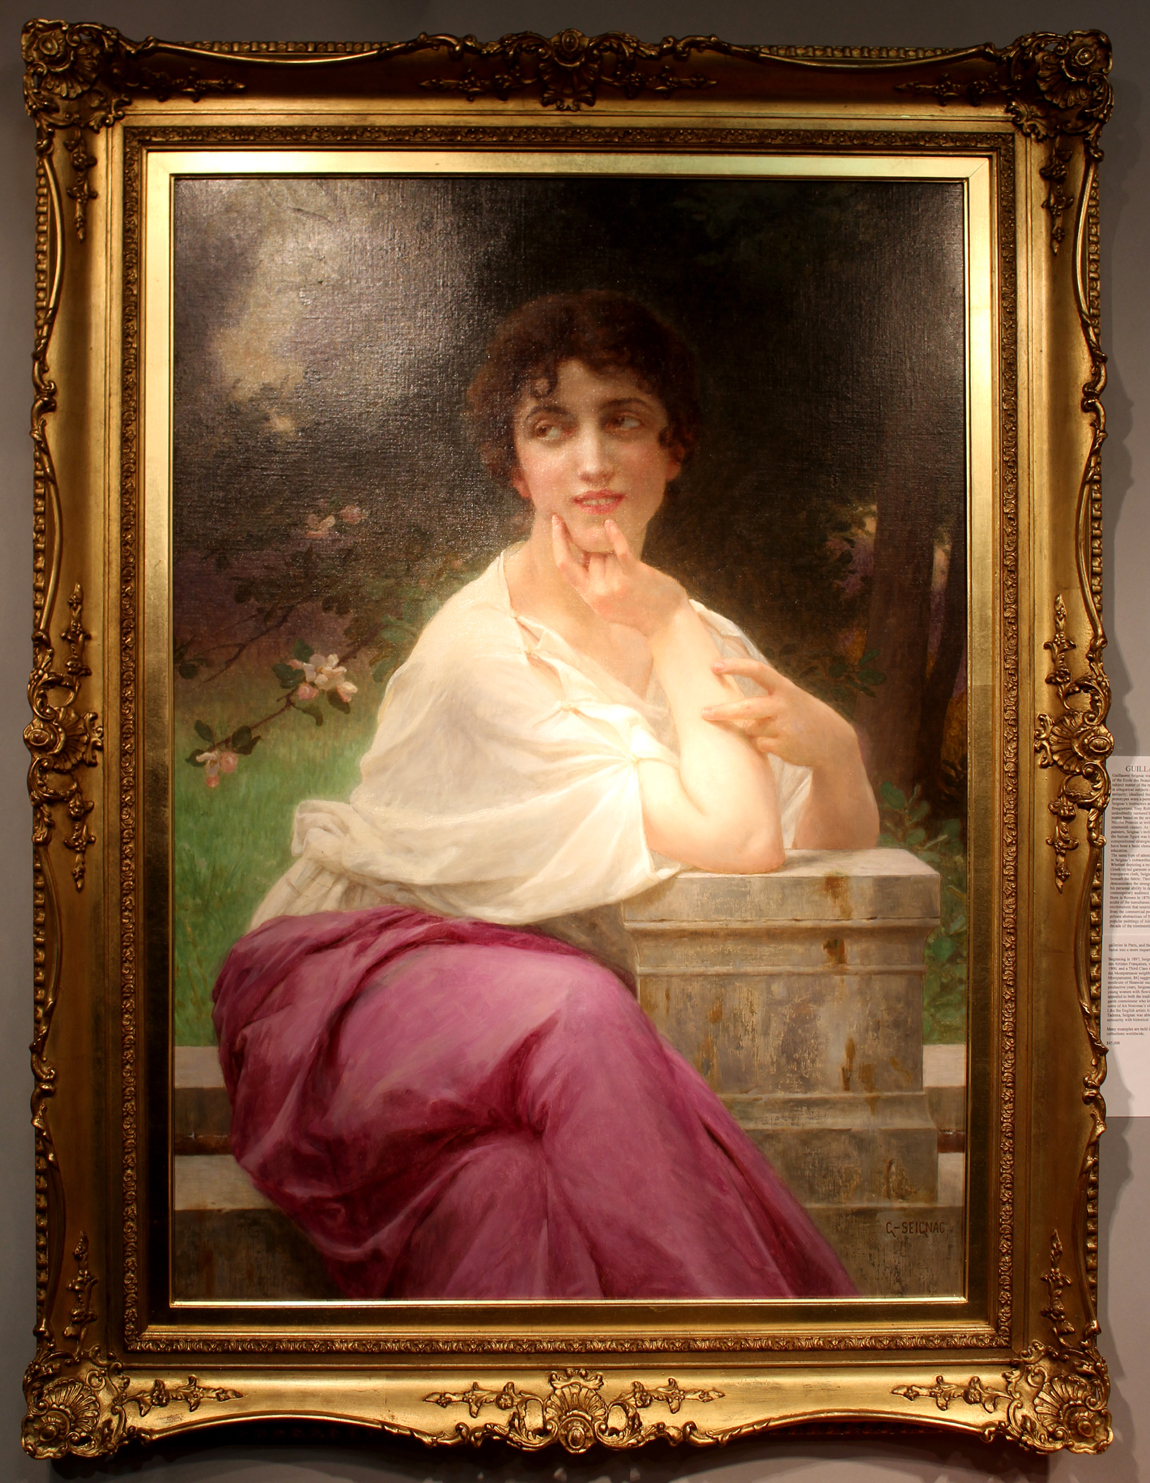 “I saw some old clients and had lots of interest from new clients,” said fine art dealer David Brooker of Woodbury, Conn., who showed this portrait by French Nineteenth Century academic painter Guillaume Seignac. A student of William-Adolphe Bouguereau at the École des Beaux-Arts, Seignac’s portraits of beautiful young women with flowing hair and diaphanous clothing found great appeal.